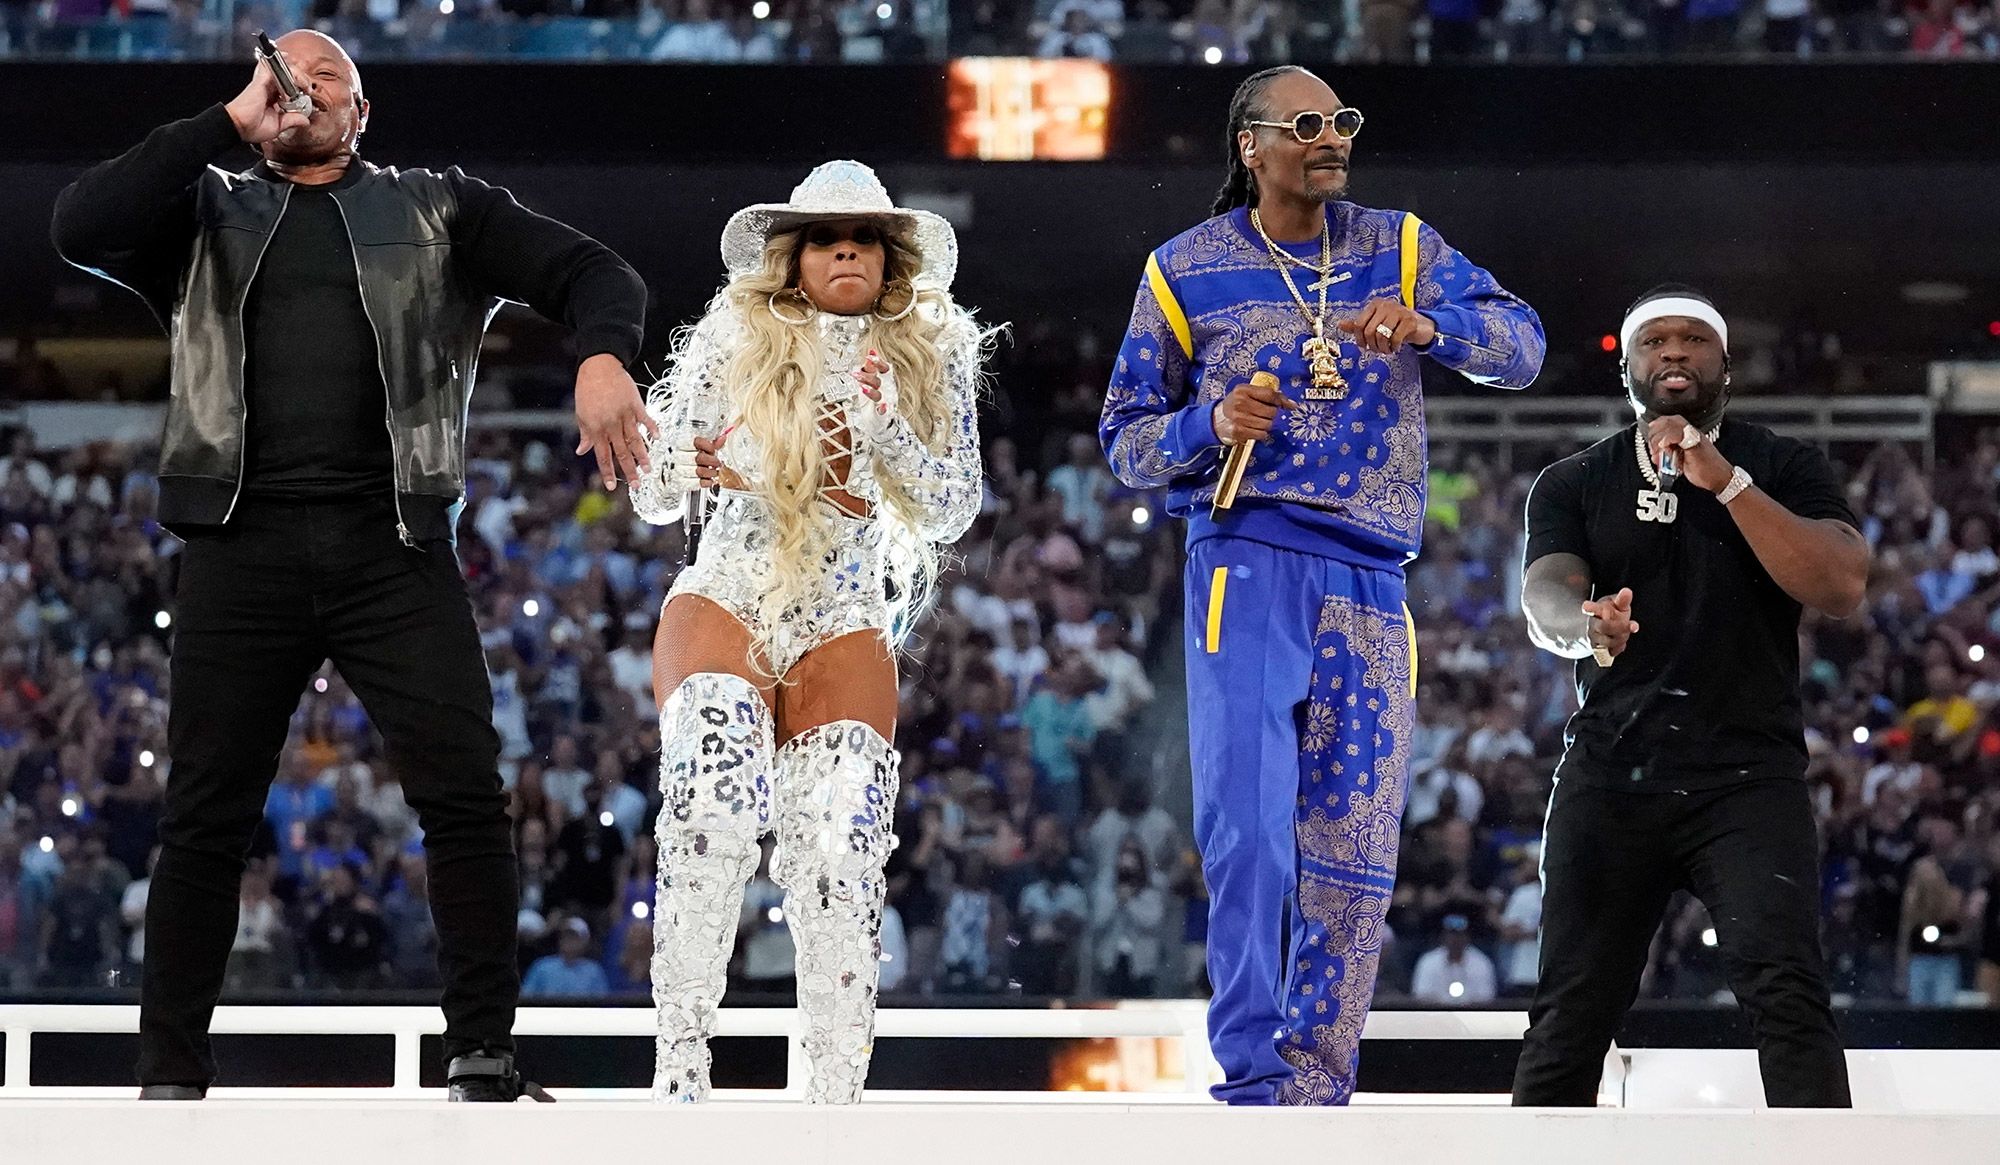 Everything to know about the Super Bowl halftime show